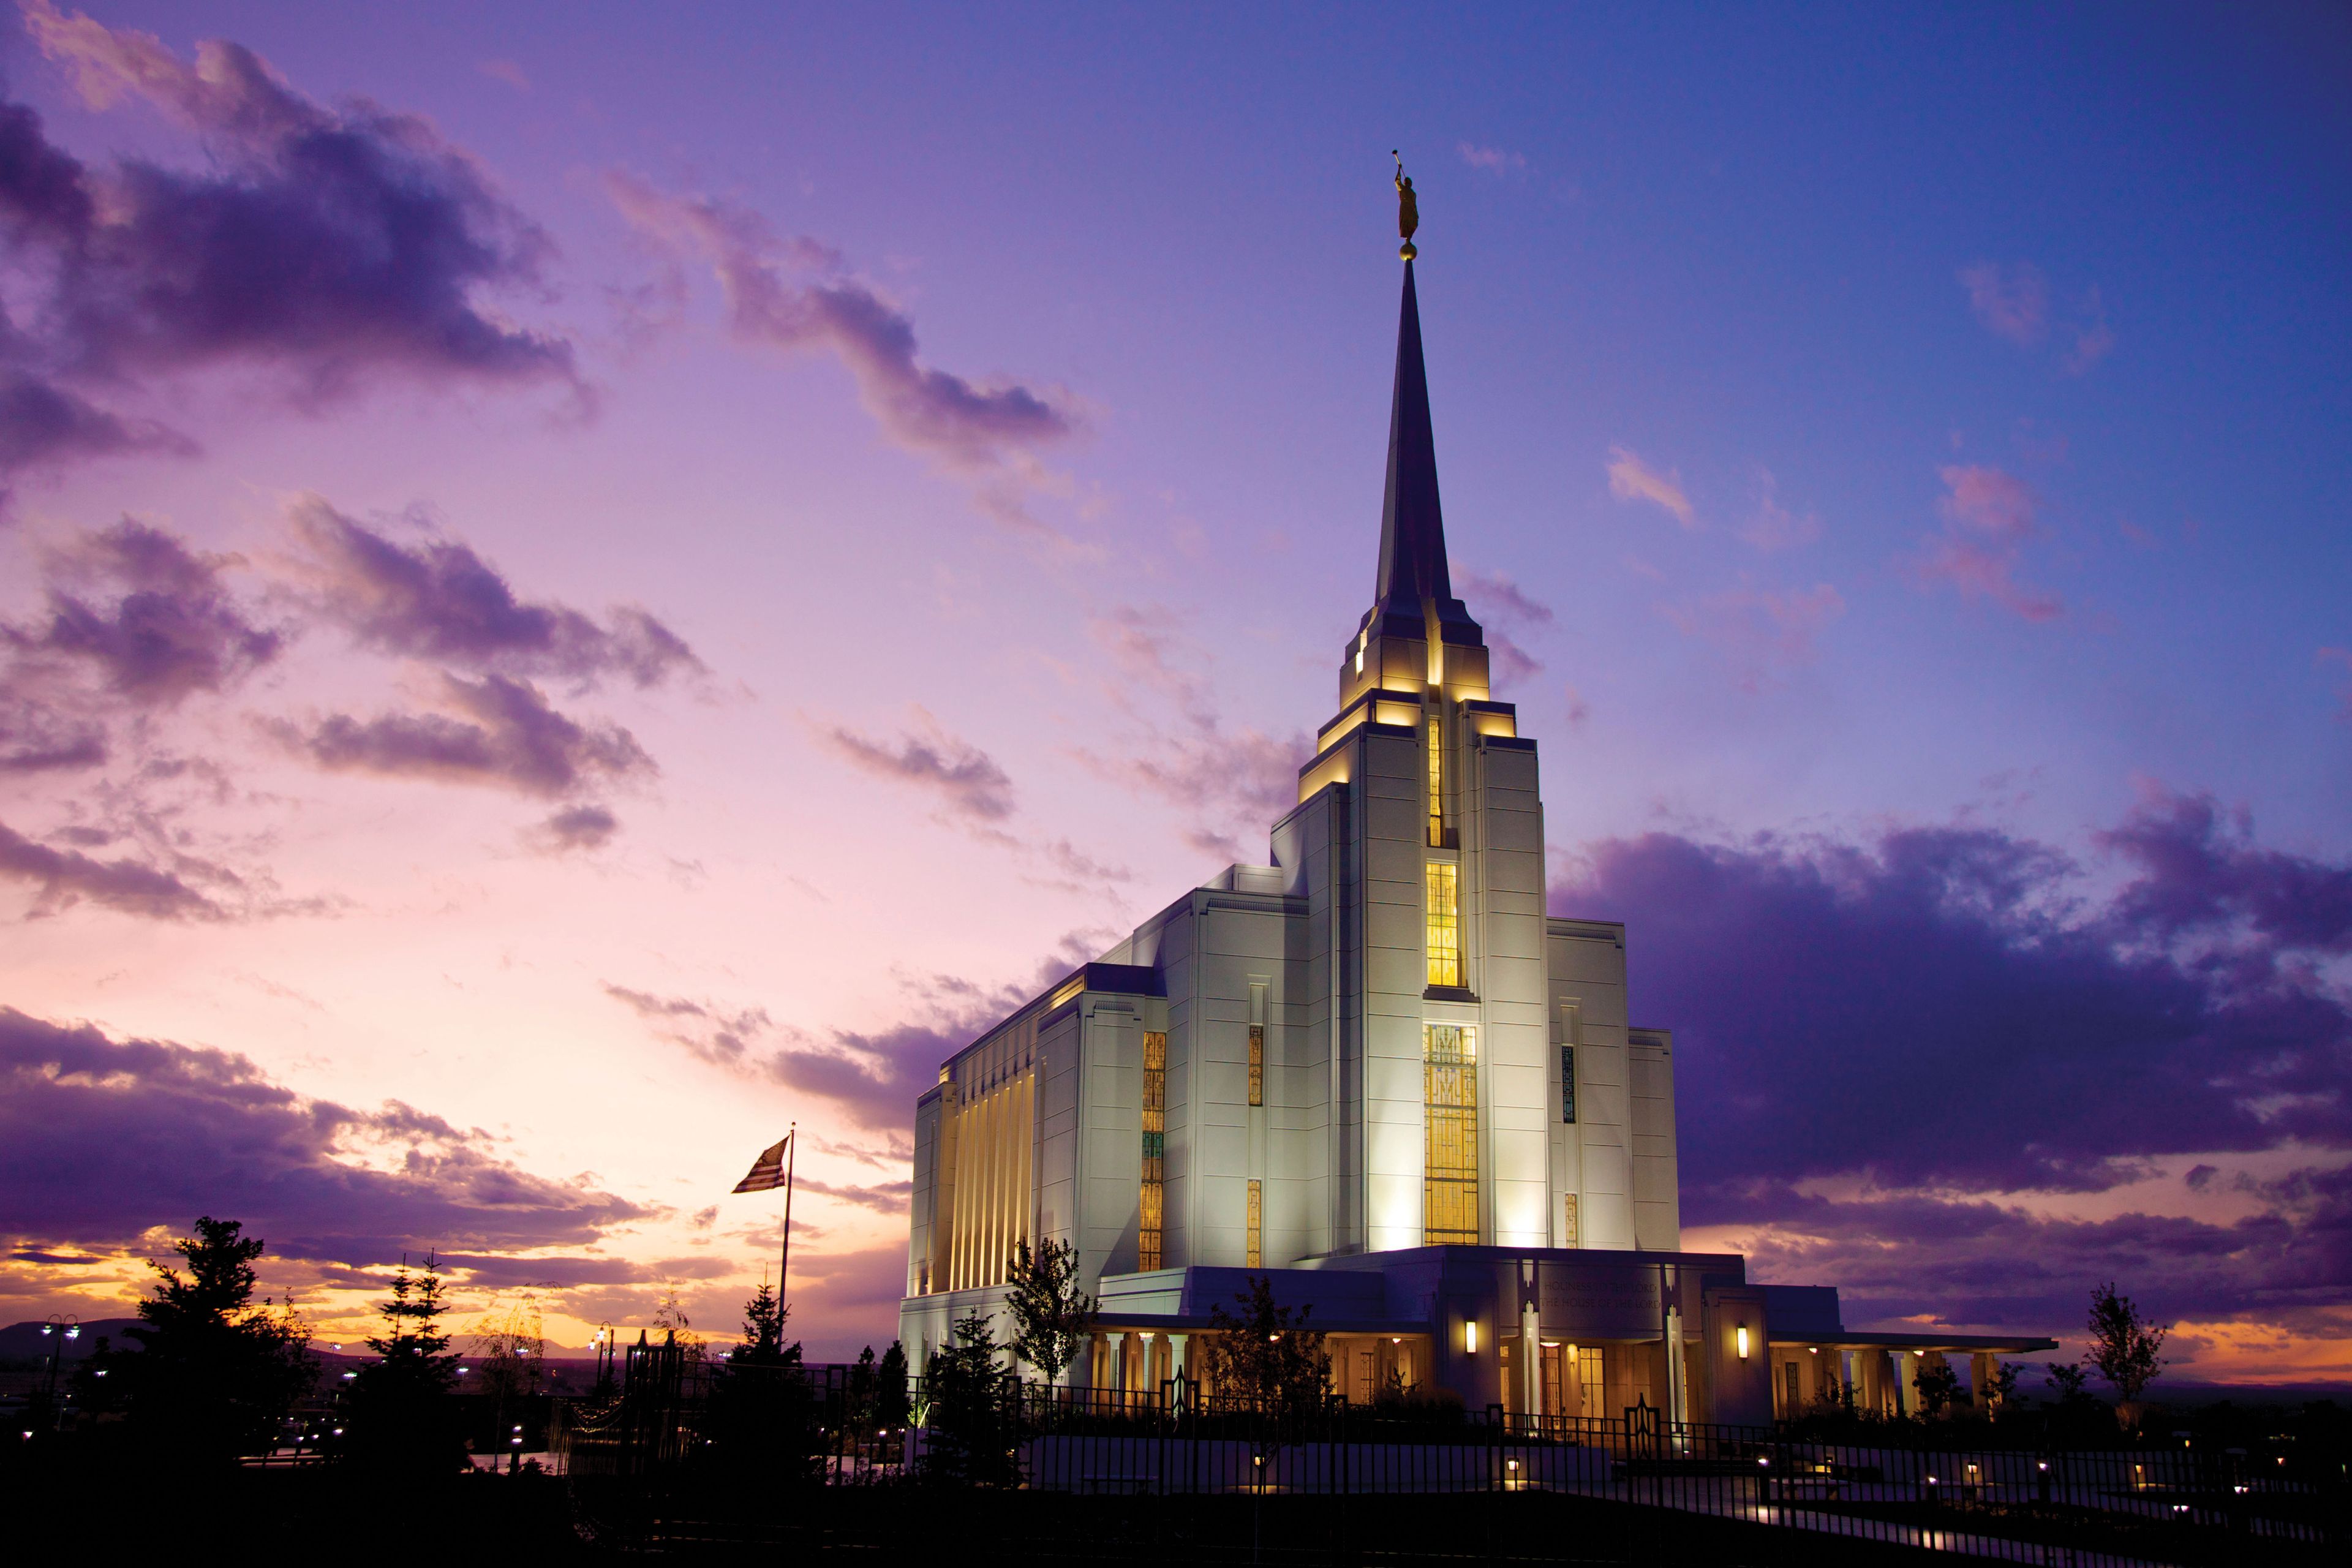 The Rexburg Idaho Temple in the evening, including scenery and clouds.